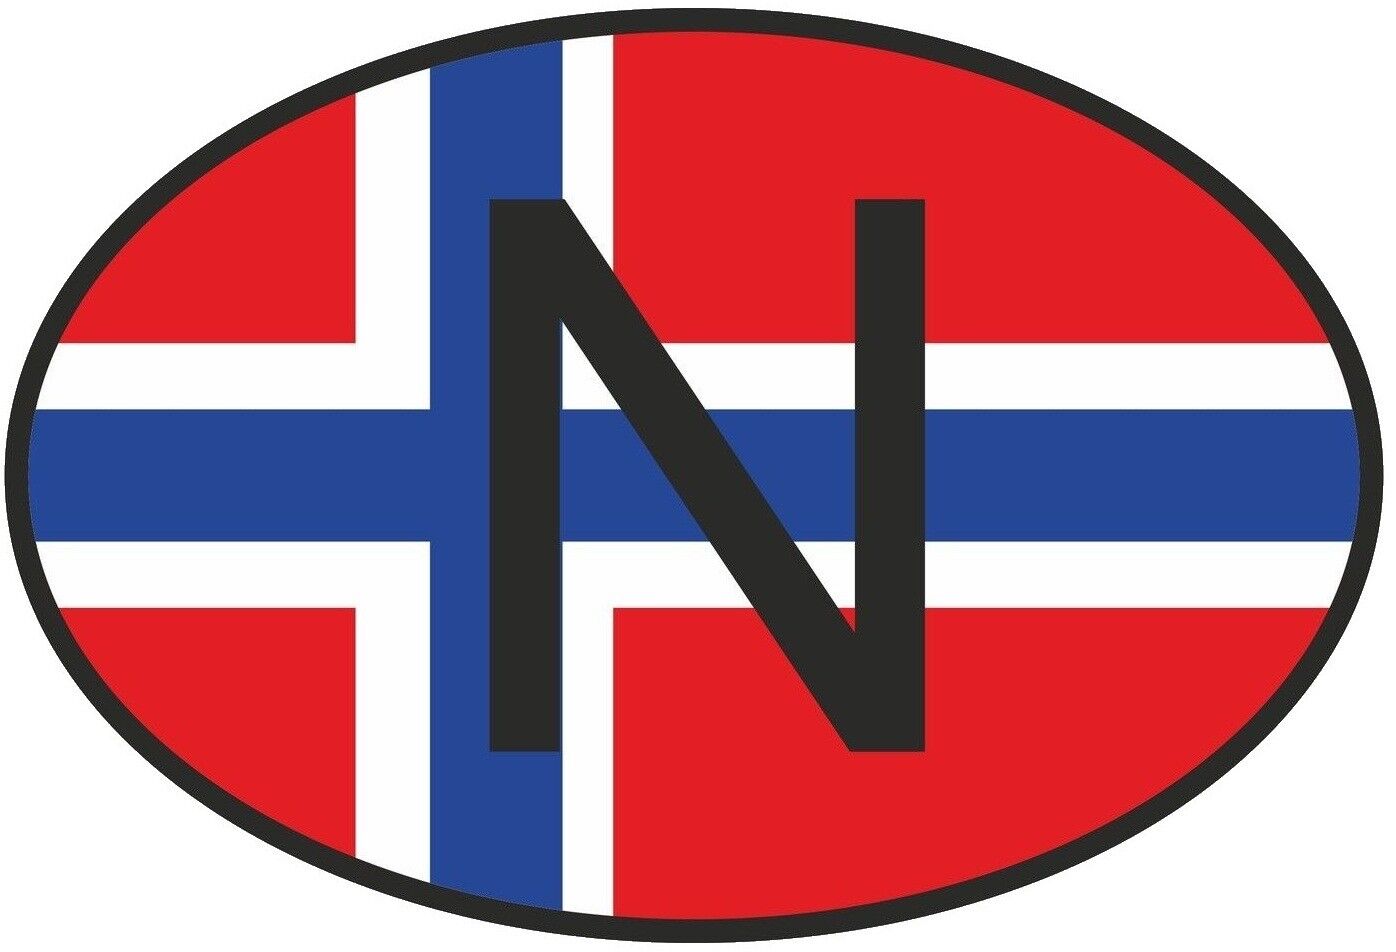 N NORWAY COUNTRY CODE OVAL WITH FLAG STICKER LAPTOP STICKER WINDOW STICKER 